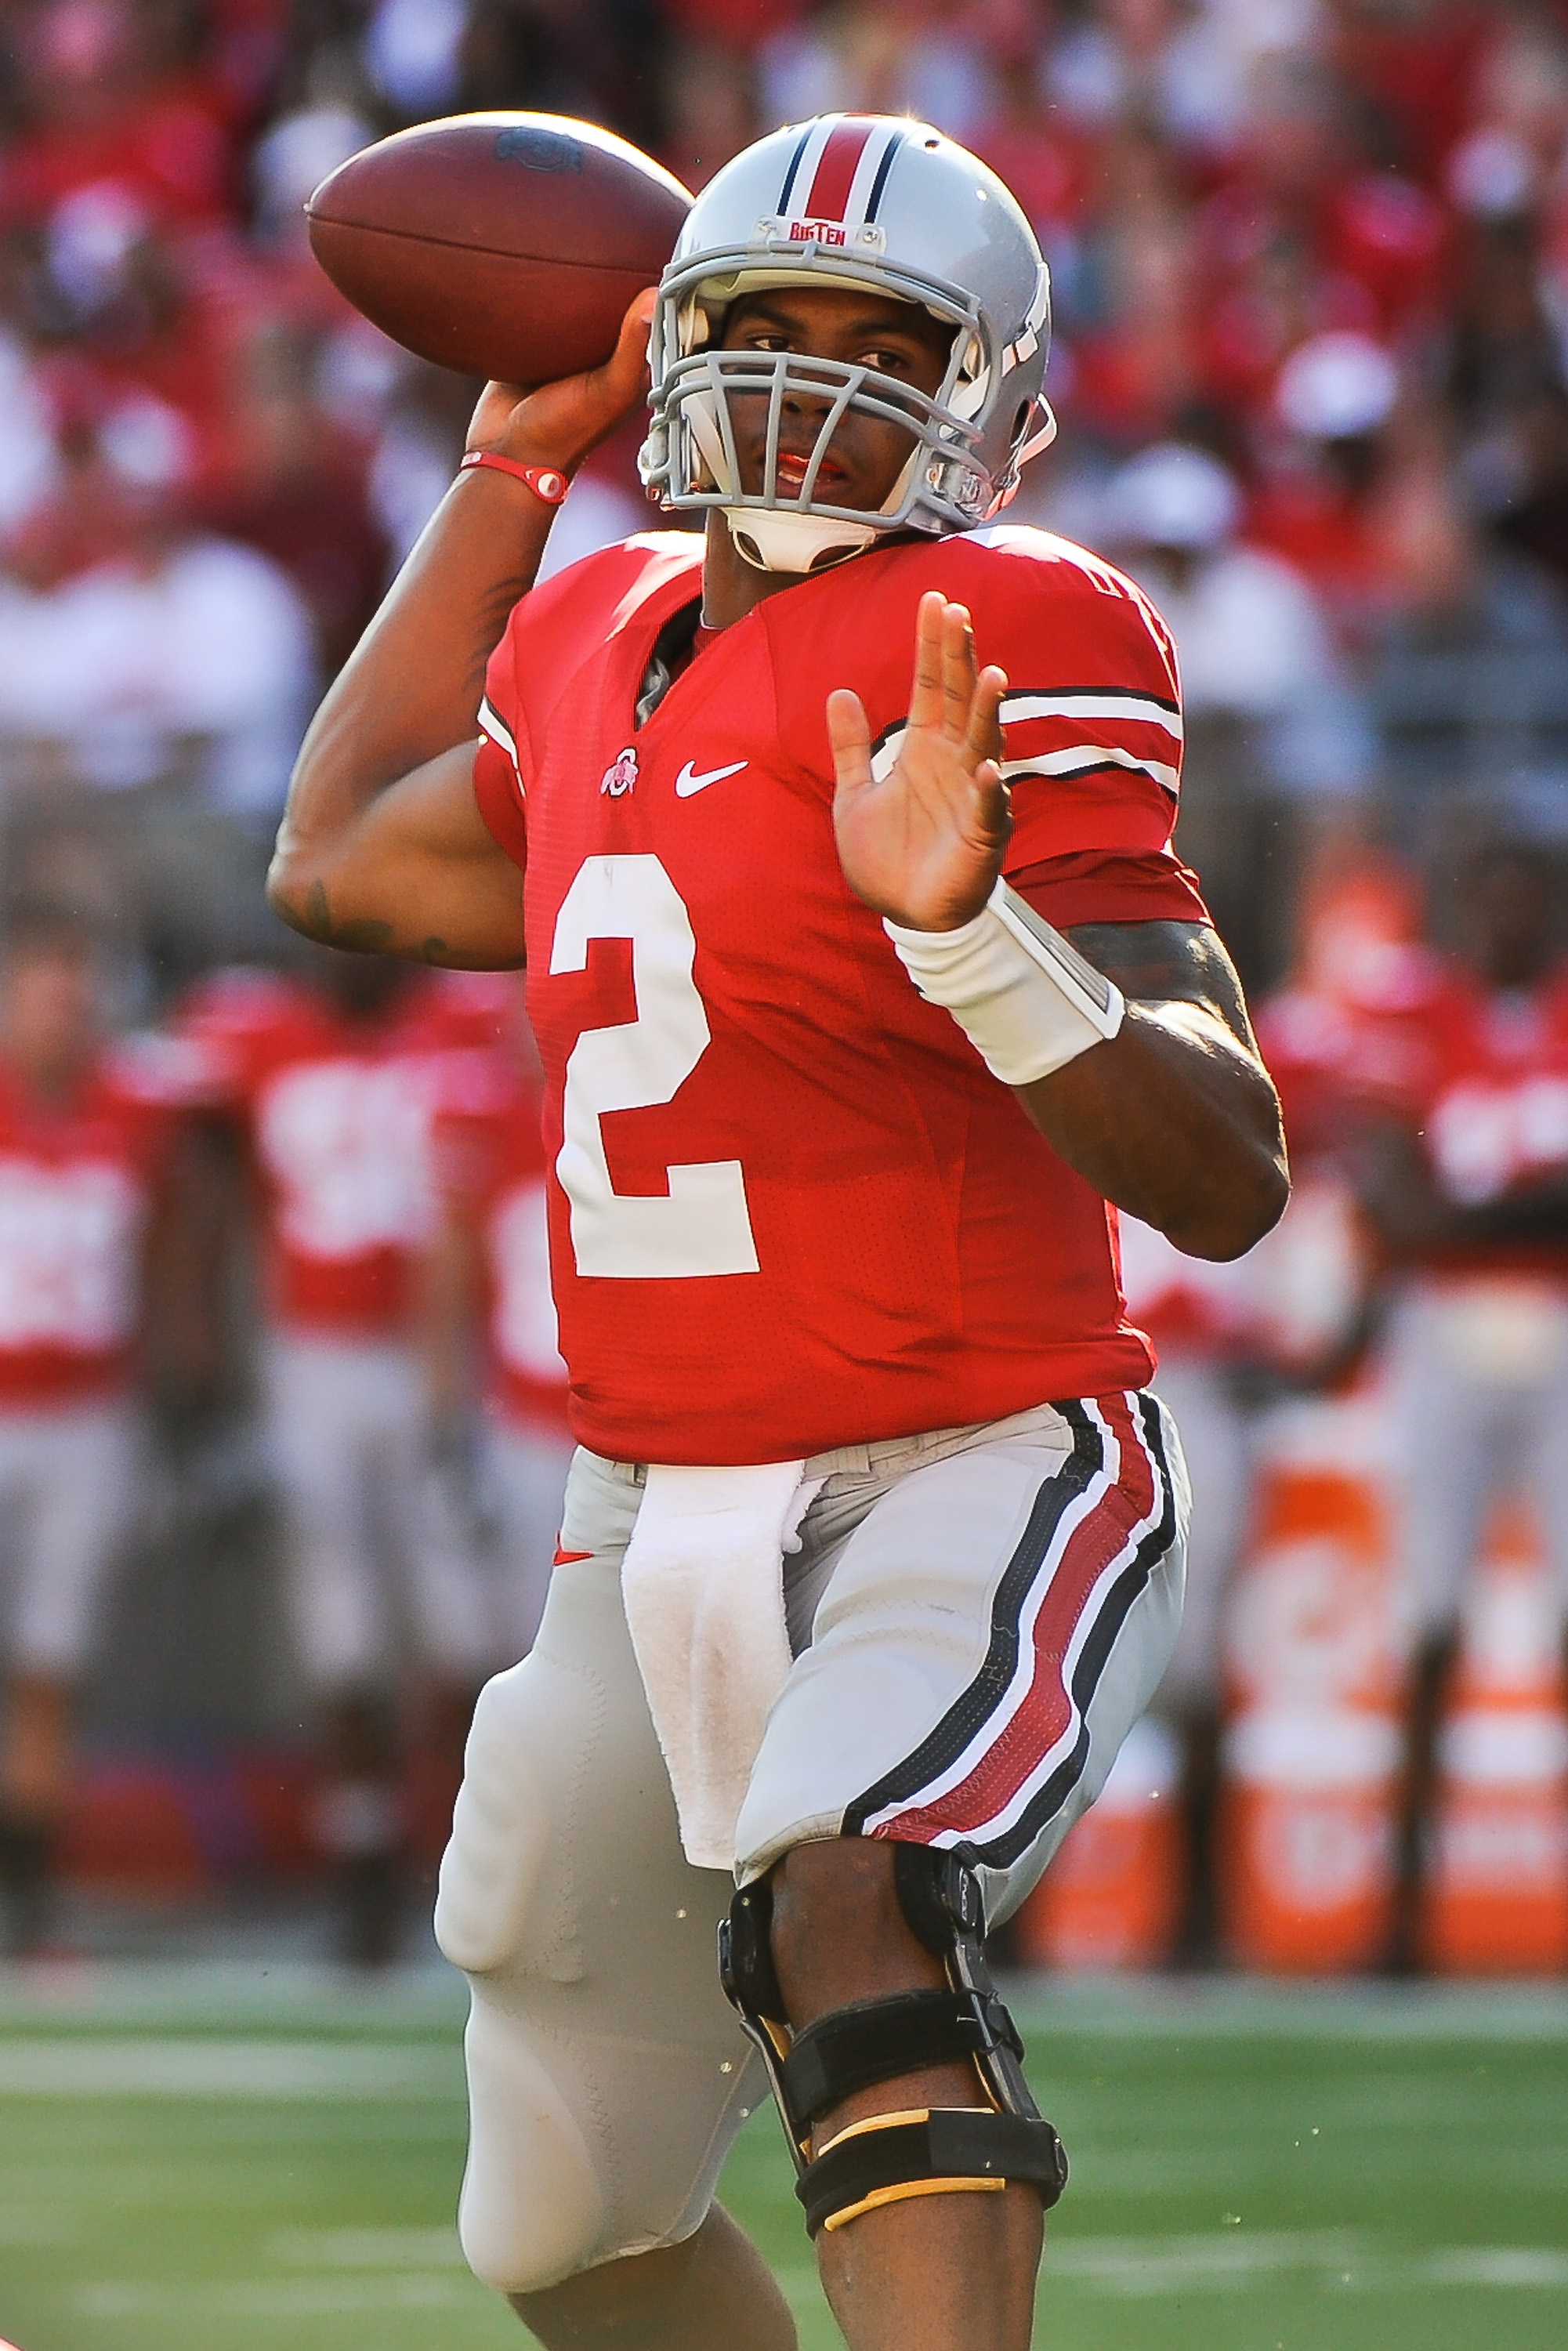 Ohio State QB Terrelle Pryor: Where Does He Rank Amongst Jim Tressel Era QBs?, News, Scores, Highlights, Stats, and Rumors